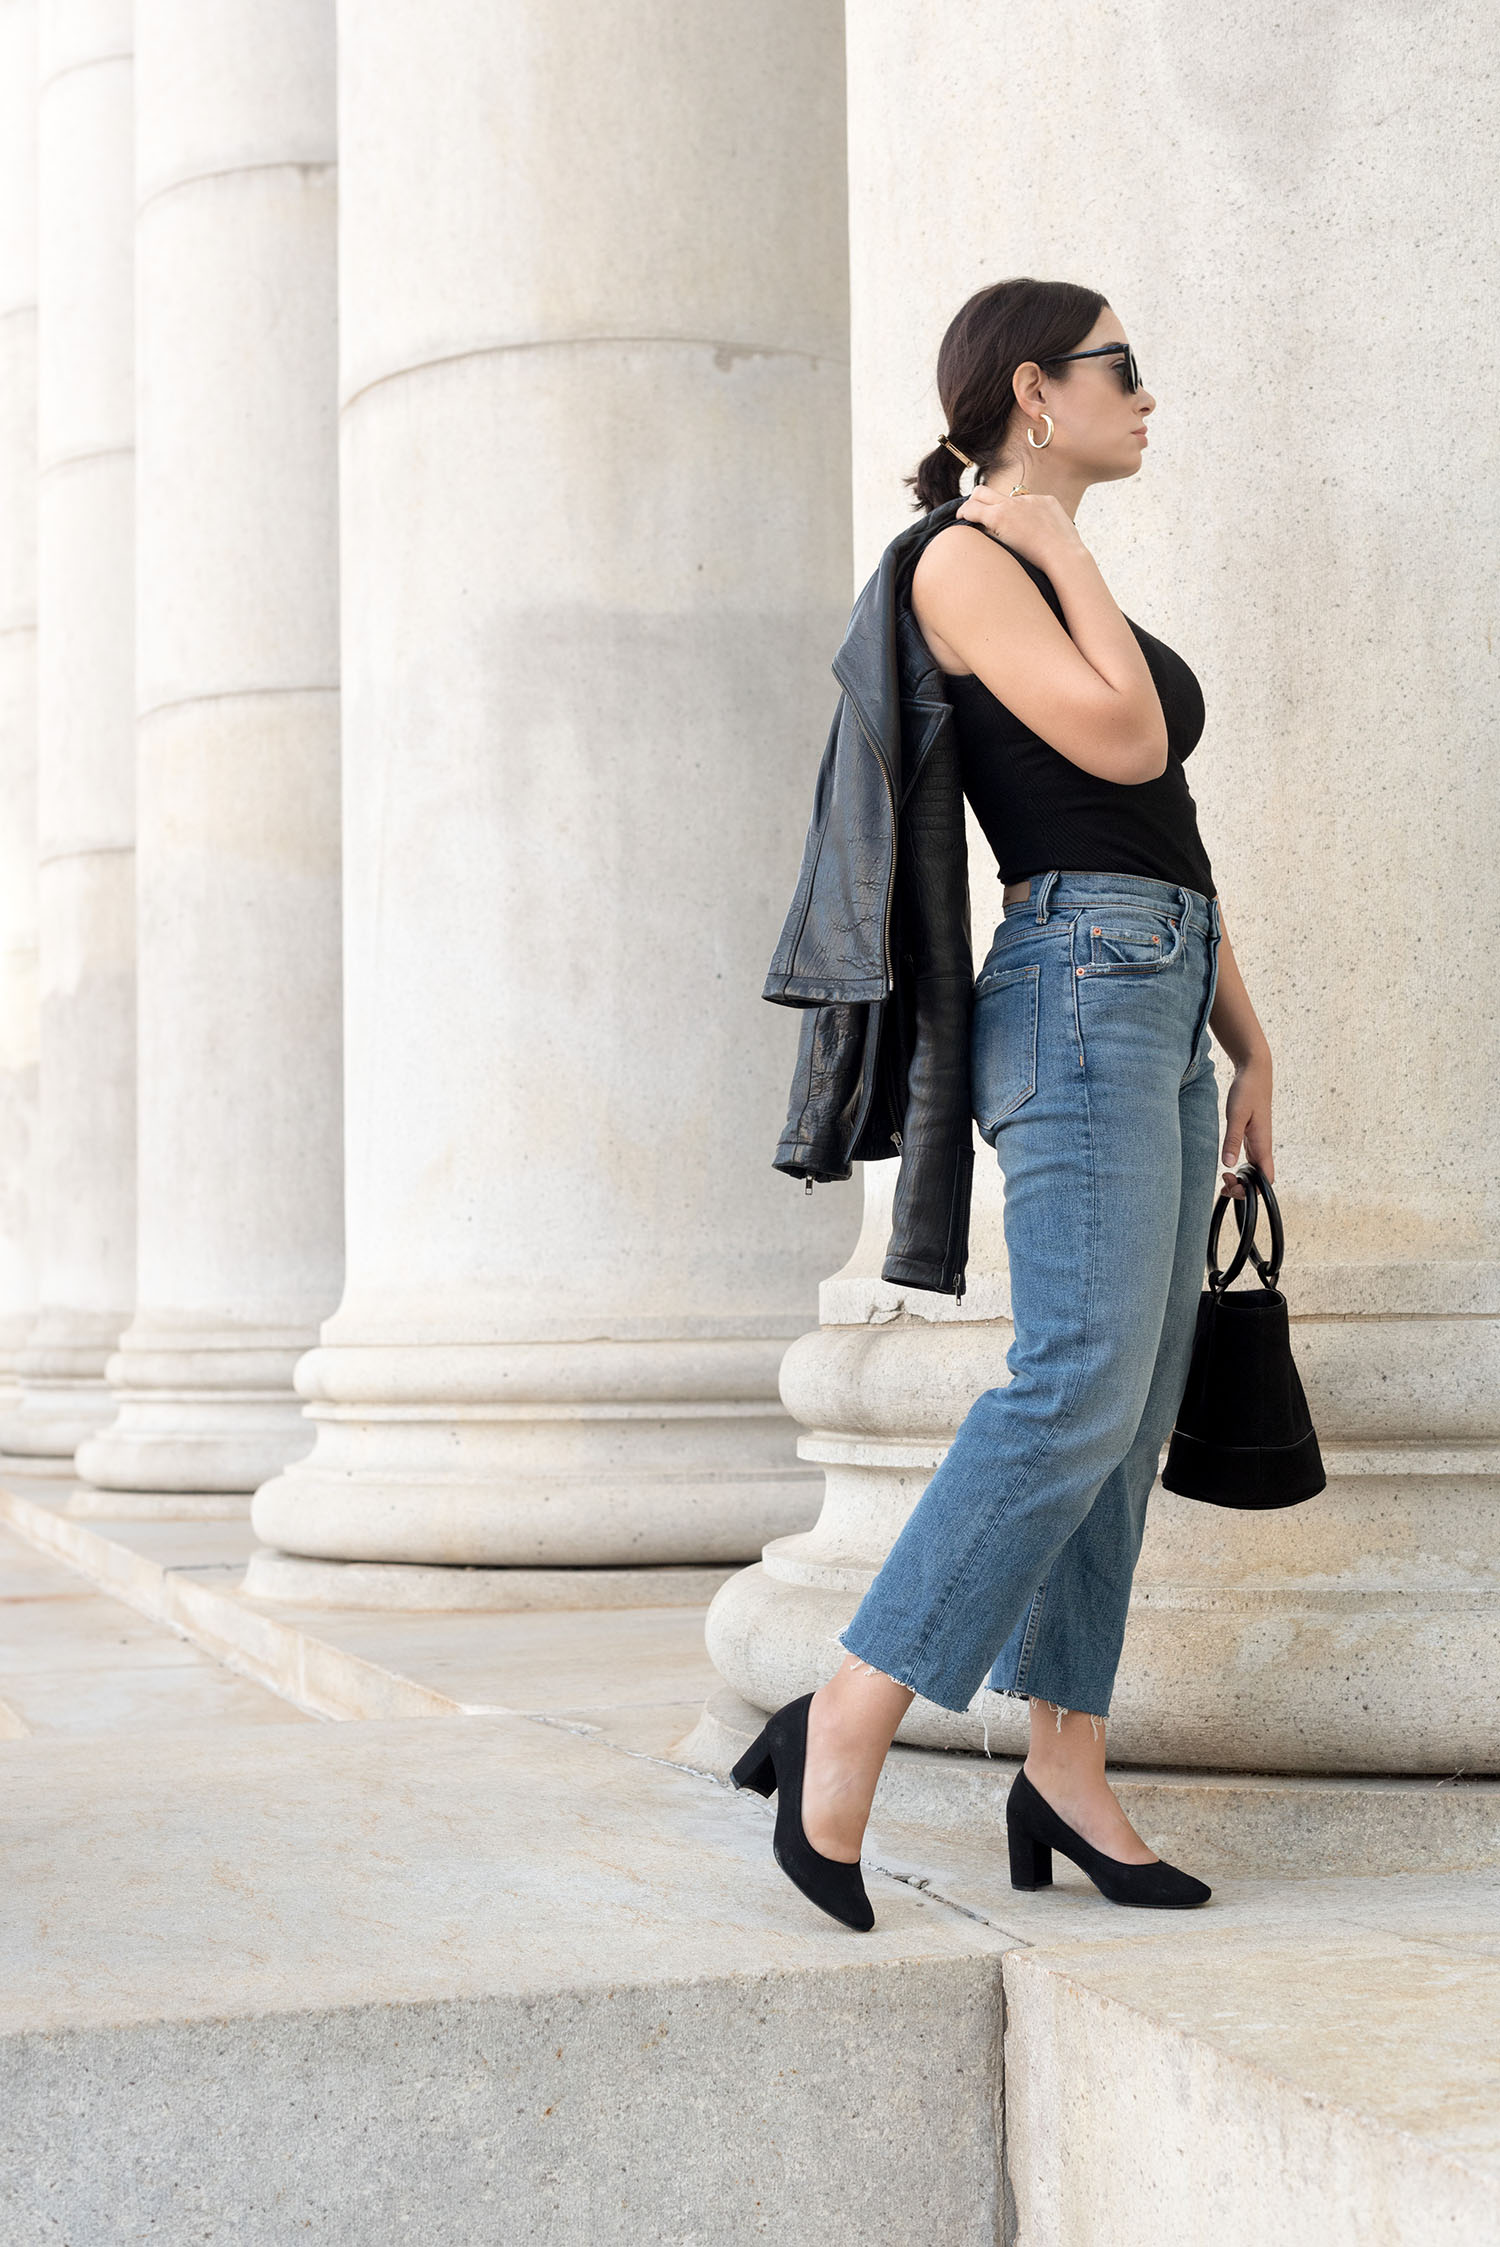 Top Winnipeg fashion blogger Cee Fardoe of Coco & Vera stands outside the Bank of Montreal wearing Grlfrnd Helena jeans and H&M block heels